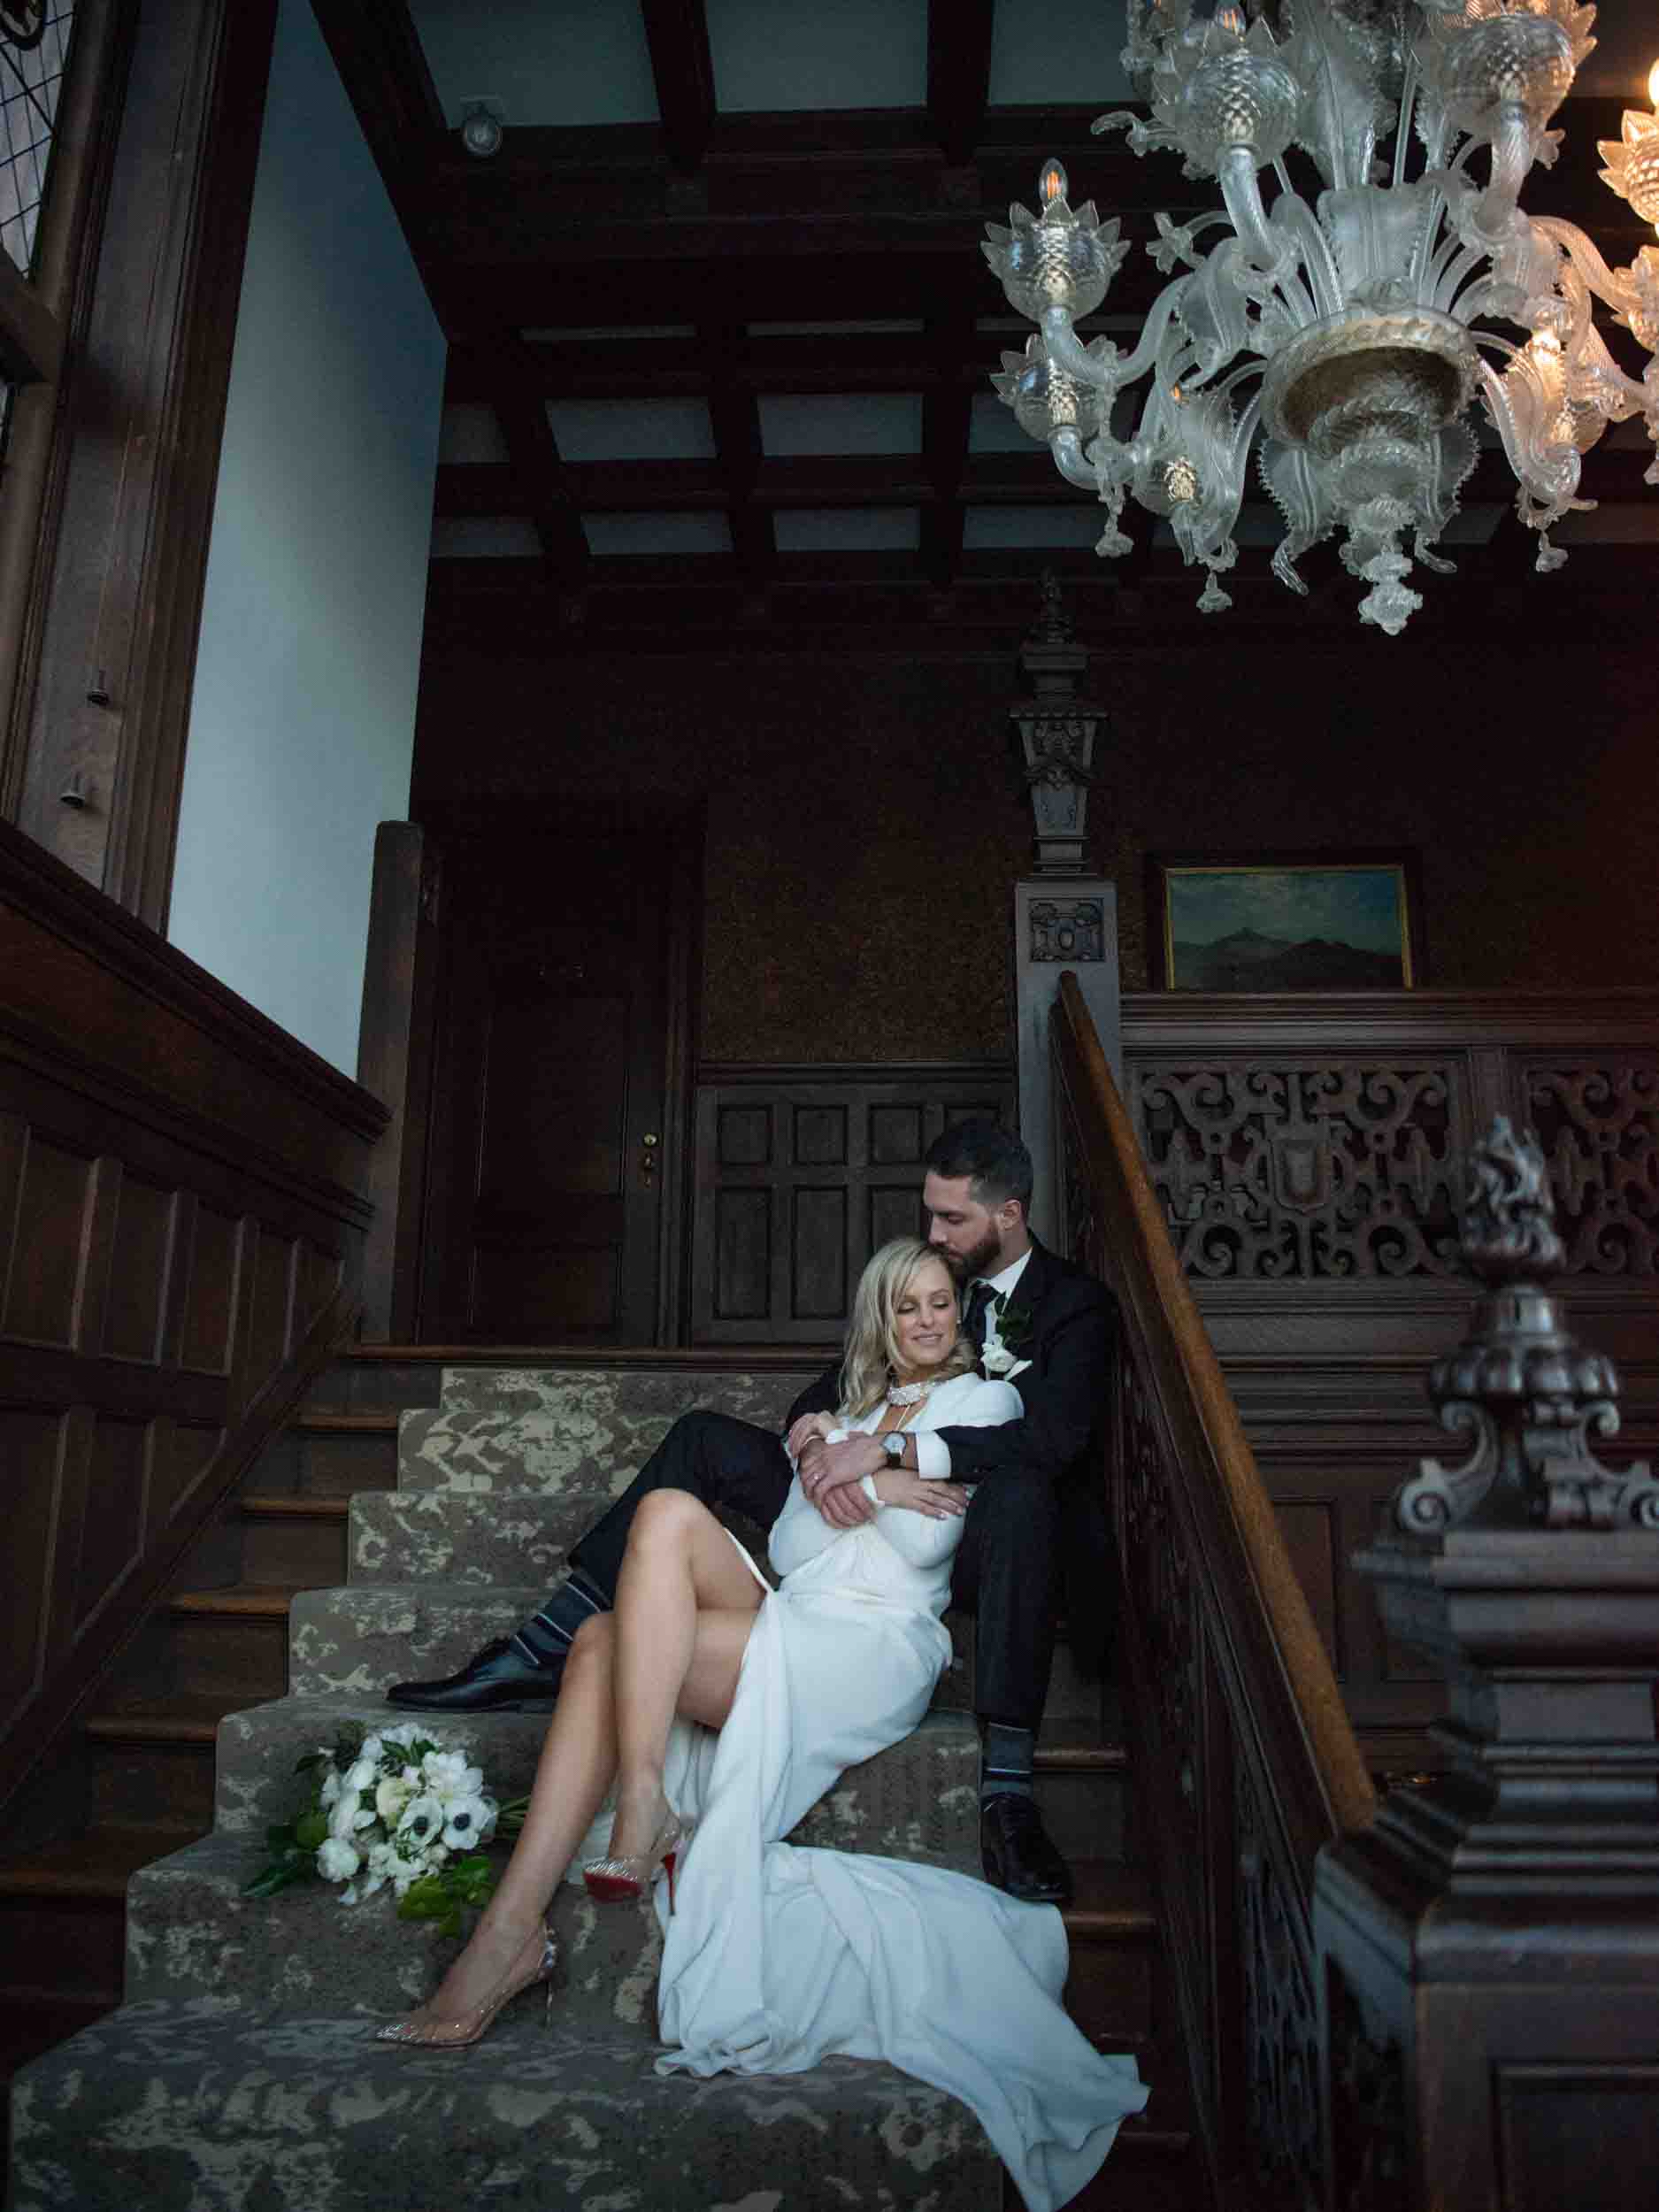 Bride and groom cuddled up on the stairs of gilded-age manor